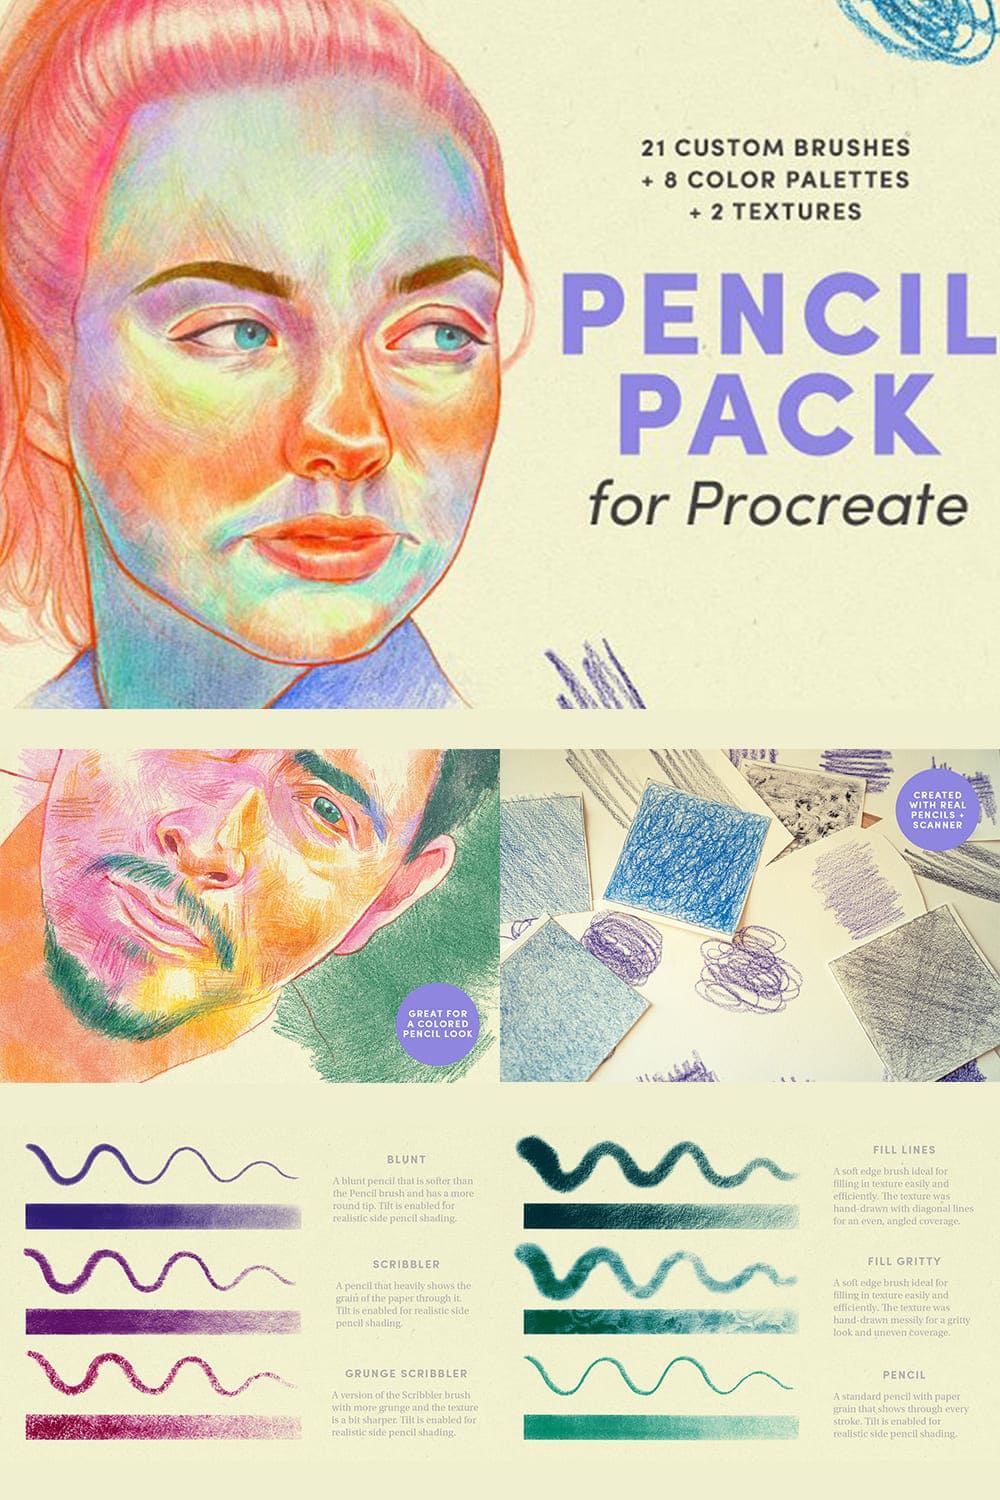 Pencil Pack For Procreate - Custom Brushes, Palettes And Textures.